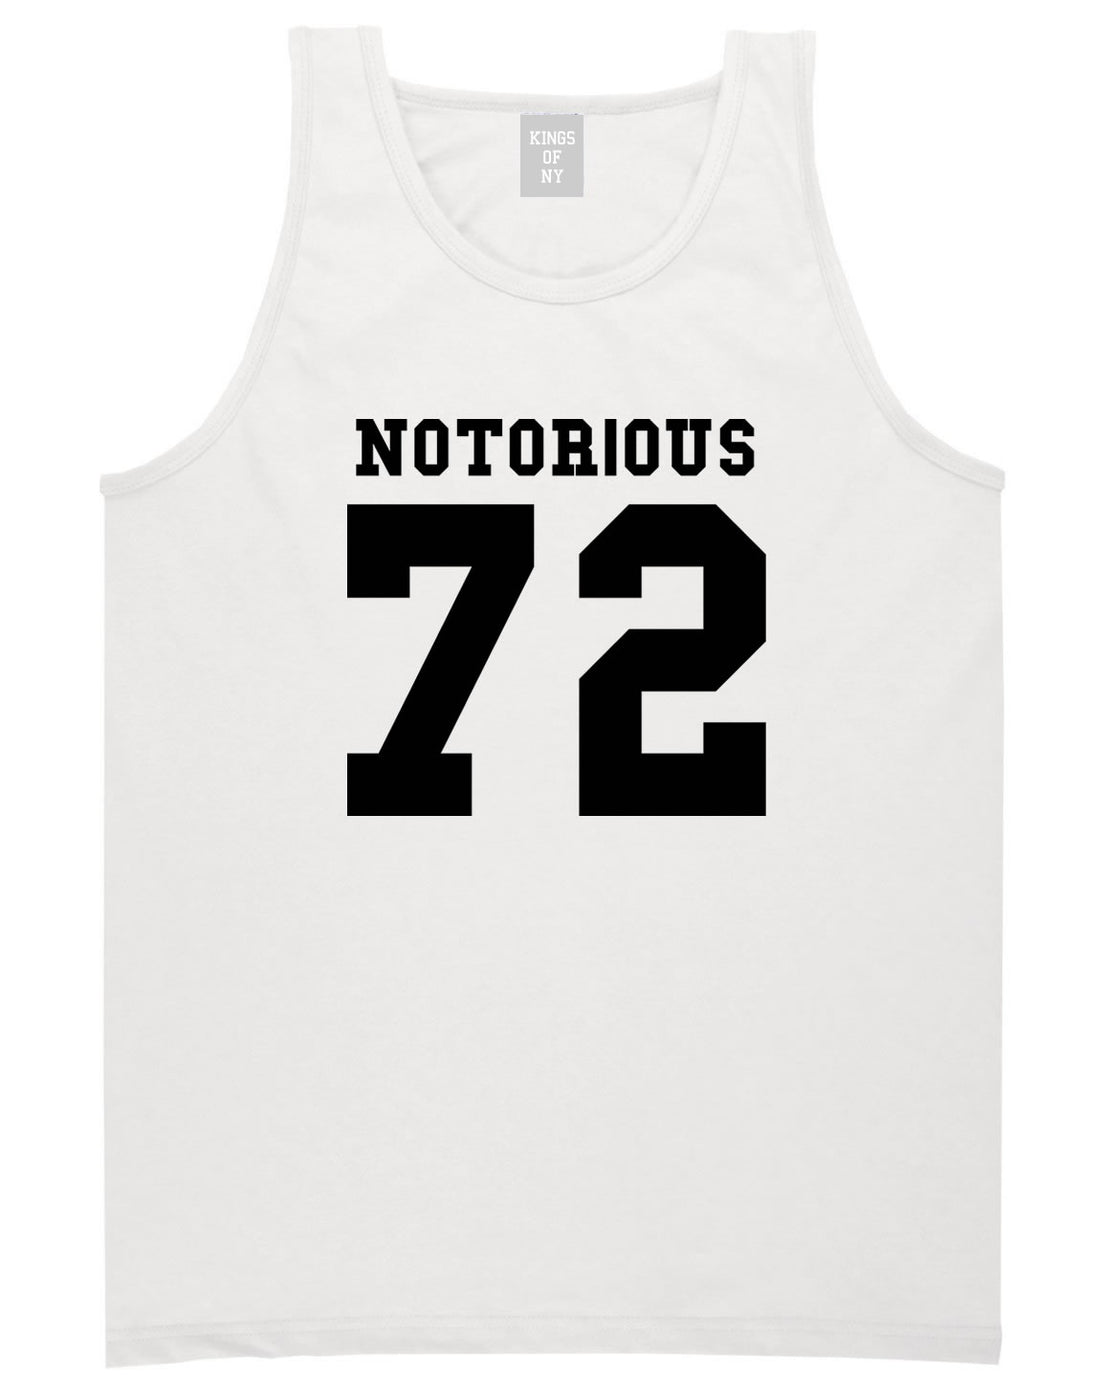 Notorious 72 Team Tank Top in White by Kings Of NY